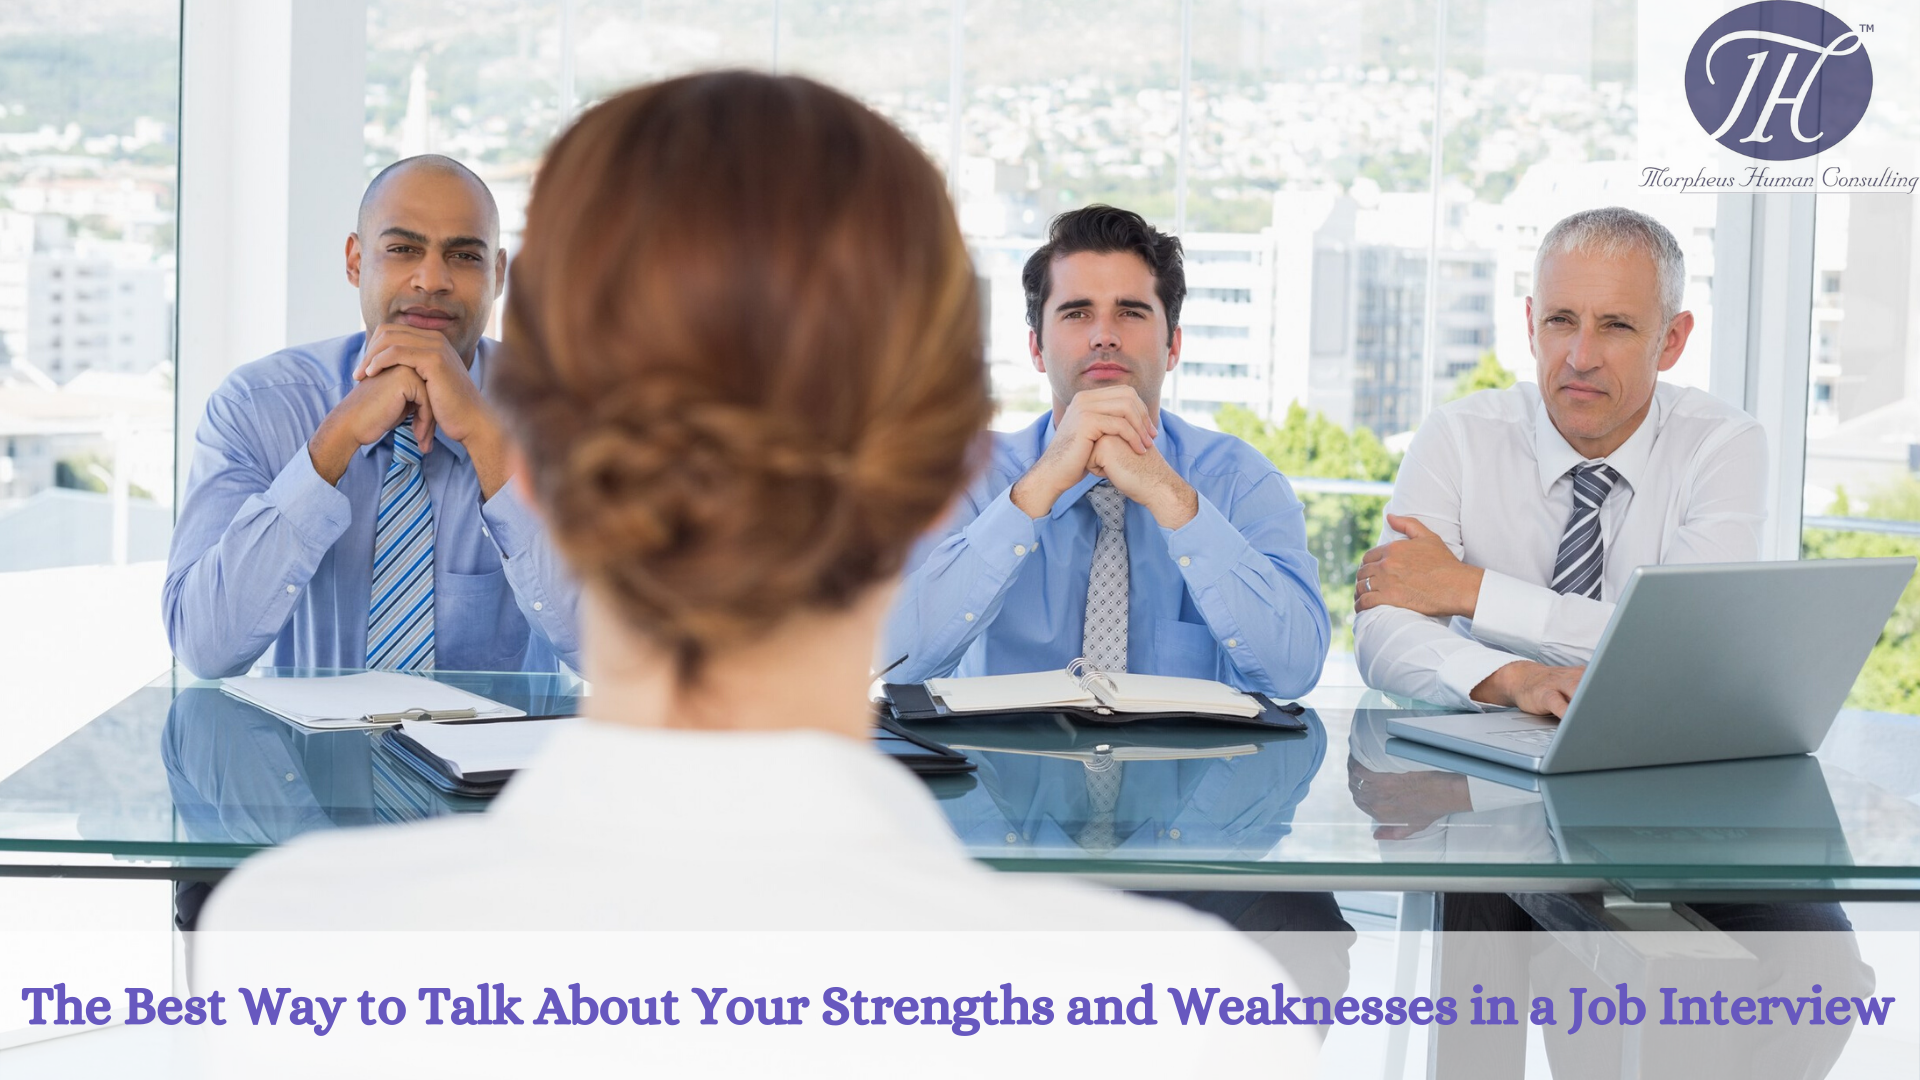 The Best Way to Talk About Your Strengths and Weaknesses in a Job Interview